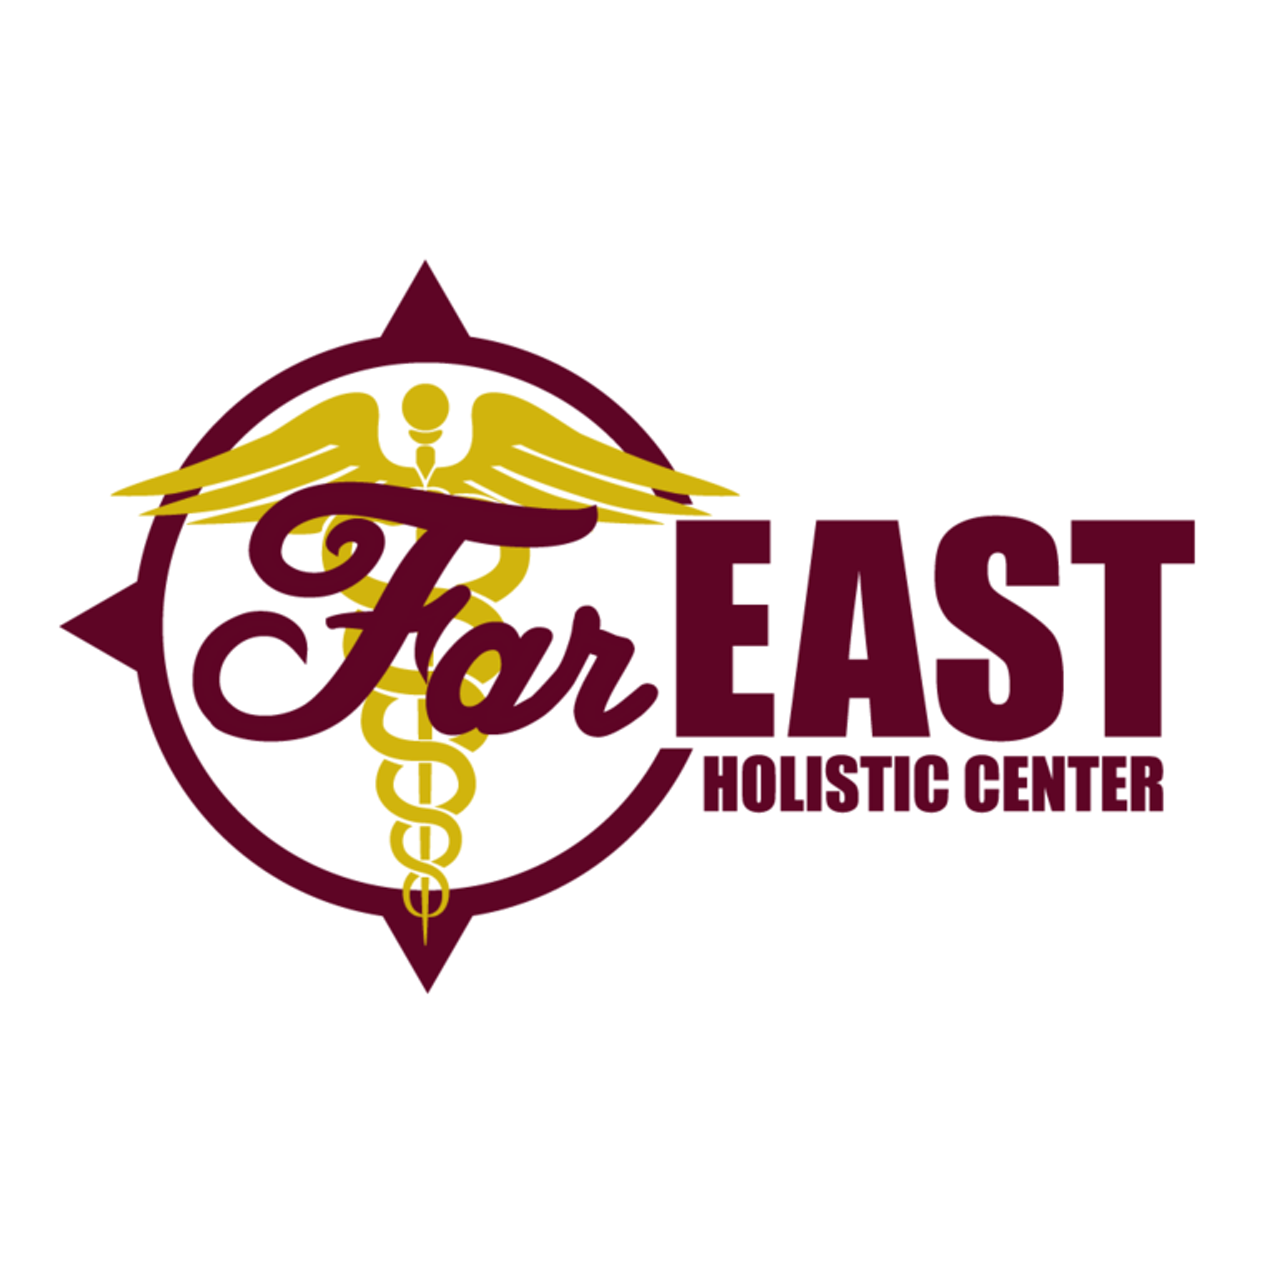 Far East Holistic Center
16094 E. 8 Mile&nbsp;Detroit,&nbsp;MI&nbsp;48205
(313) 469-0576
A must visit for newbies &#151; patient and knowledgable staff in a secure facility. FEHC is on, you guessed it, the eastside of Detroit and offers flowers, edibles, prerolls, and topicals. New patients receive a free gift bag.